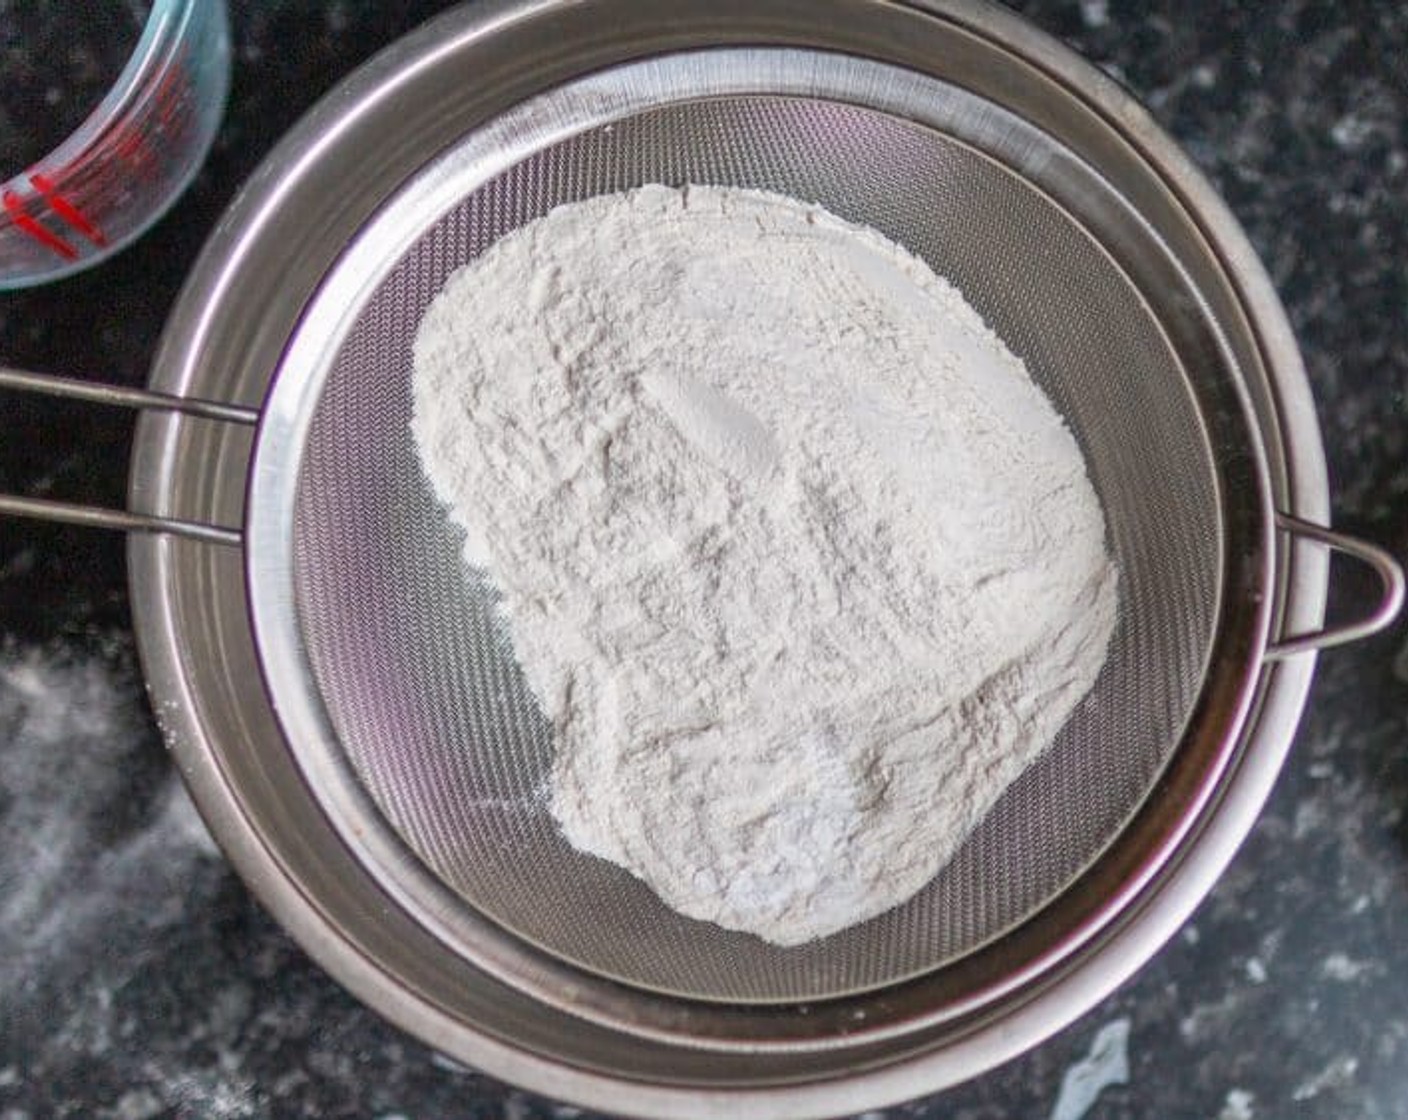 step 2 Sift All-Purpose Flour (1 3/4 cups), Baking Powder (1 Tbsp), and Salt (1 pinch) into a large mixing bowl.